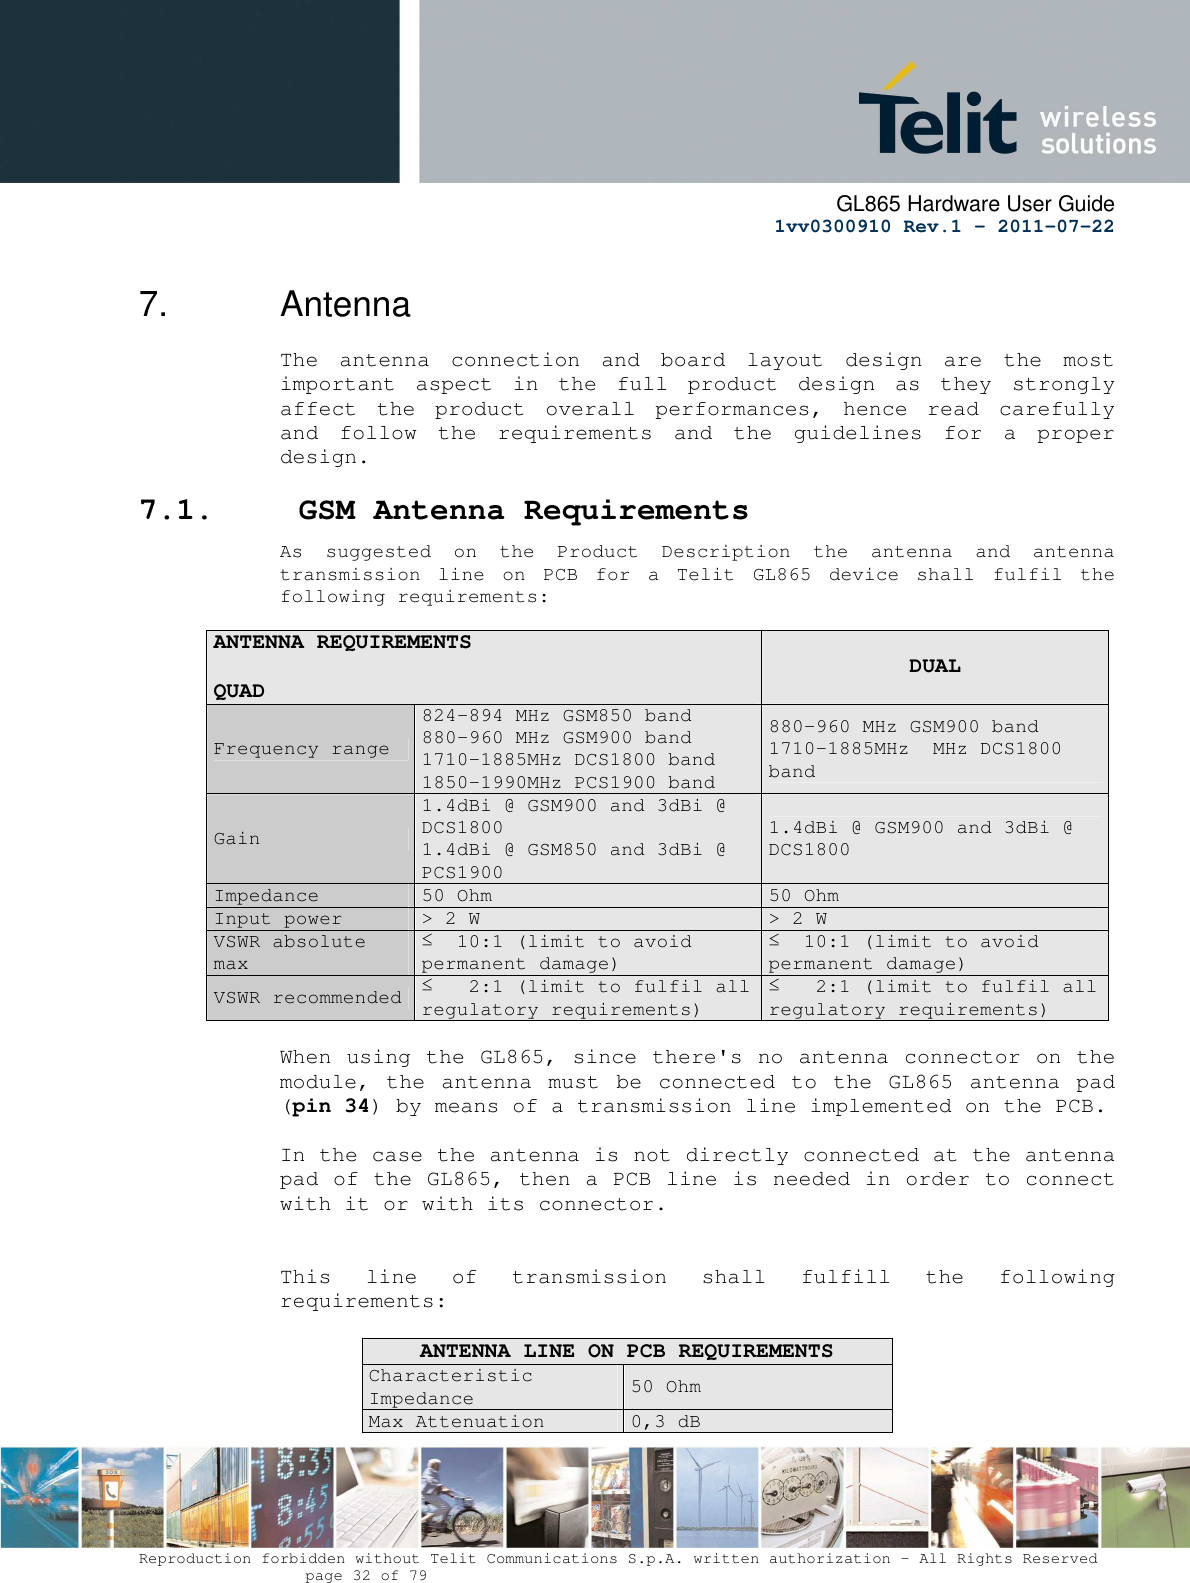      GL865 Hardware User Guide     1vv0300910 Rev.1 – 2011-07-22       Reproduction forbidden without Telit Communications S.p.A. written authorization - All Rights Reserved    page 32 of 79  7.  Antenna The  antenna  connection  and  board  layout  design  are  the  most important  aspect  in  the  full  product  design  as  they  strongly affect  the  product  overall  performances,  hence  read  carefully and  follow  the  requirements  and  the  guidelines  for  a  proper design. 7.1.  GSM Antenna Requirements As  suggested  on  the  Product  Description  the  antenna  and  antenna transmission  line  on  PCB  for  a  Telit  GL865  device  shall  fulfil  the following requirements:  ANTENNA REQUIREMENTS                                                          QUAD  DUAL Frequency range 824-894 MHz GSM850 band 880-960 MHz GSM900 band  1710-1885MHz DCS1800 band  1850-1990MHz PCS1900 band 880-960 MHz GSM900 band 1710-1885MHz  MHz DCS1800 band Gain 1.4dBi @ GSM900 and 3dBi @ DCS1800 1.4dBi @ GSM850 and 3dBi @ PCS1900 1.4dBi @ GSM900 and 3dBi @ DCS1800 Impedance  50 Ohm  50 Ohm Input power  &gt; 2 W   &gt; 2 W  VSWR absolute max ≤  10:1 (limit to avoid permanent damage) ≤  10:1 (limit to avoid permanent damage) VSWR recommended  ≤   2:1 (limit to fulfil all regulatory requirements) ≤   2:1 (limit to fulfil all regulatory requirements)  When using the GL865, since there&apos;s no antenna connector on the module, the  antenna  must  be connected  to the  GL865  antenna  pad (pin 34) by means of a transmission line implemented on the PCB.  In the case the antenna is not directly connected at the antenna pad of the GL865, then a PCB line is needed in order to connect with it or with its connector.    This  line  of  transmission  shall  fulfill  the  following requirements:  ANTENNA LINE ON PCB REQUIREMENTS Characteristic Impedance 50 Ohm Max Attenuation  0,3 dB 